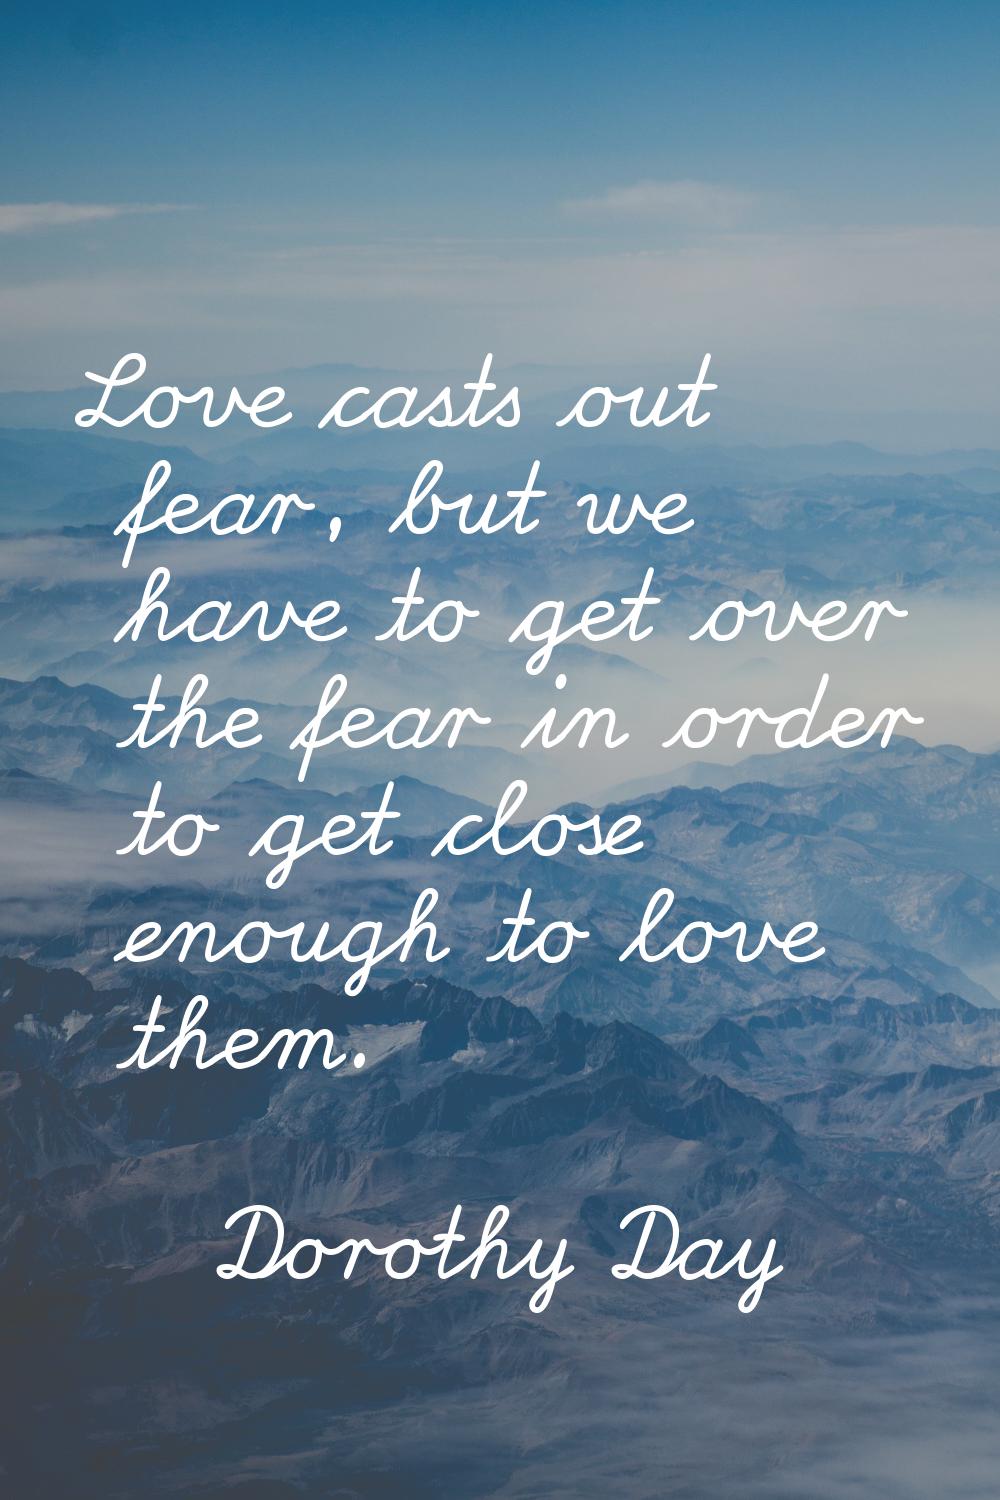 Love casts out fear, but we have to get over the fear in order to get close enough to love them.